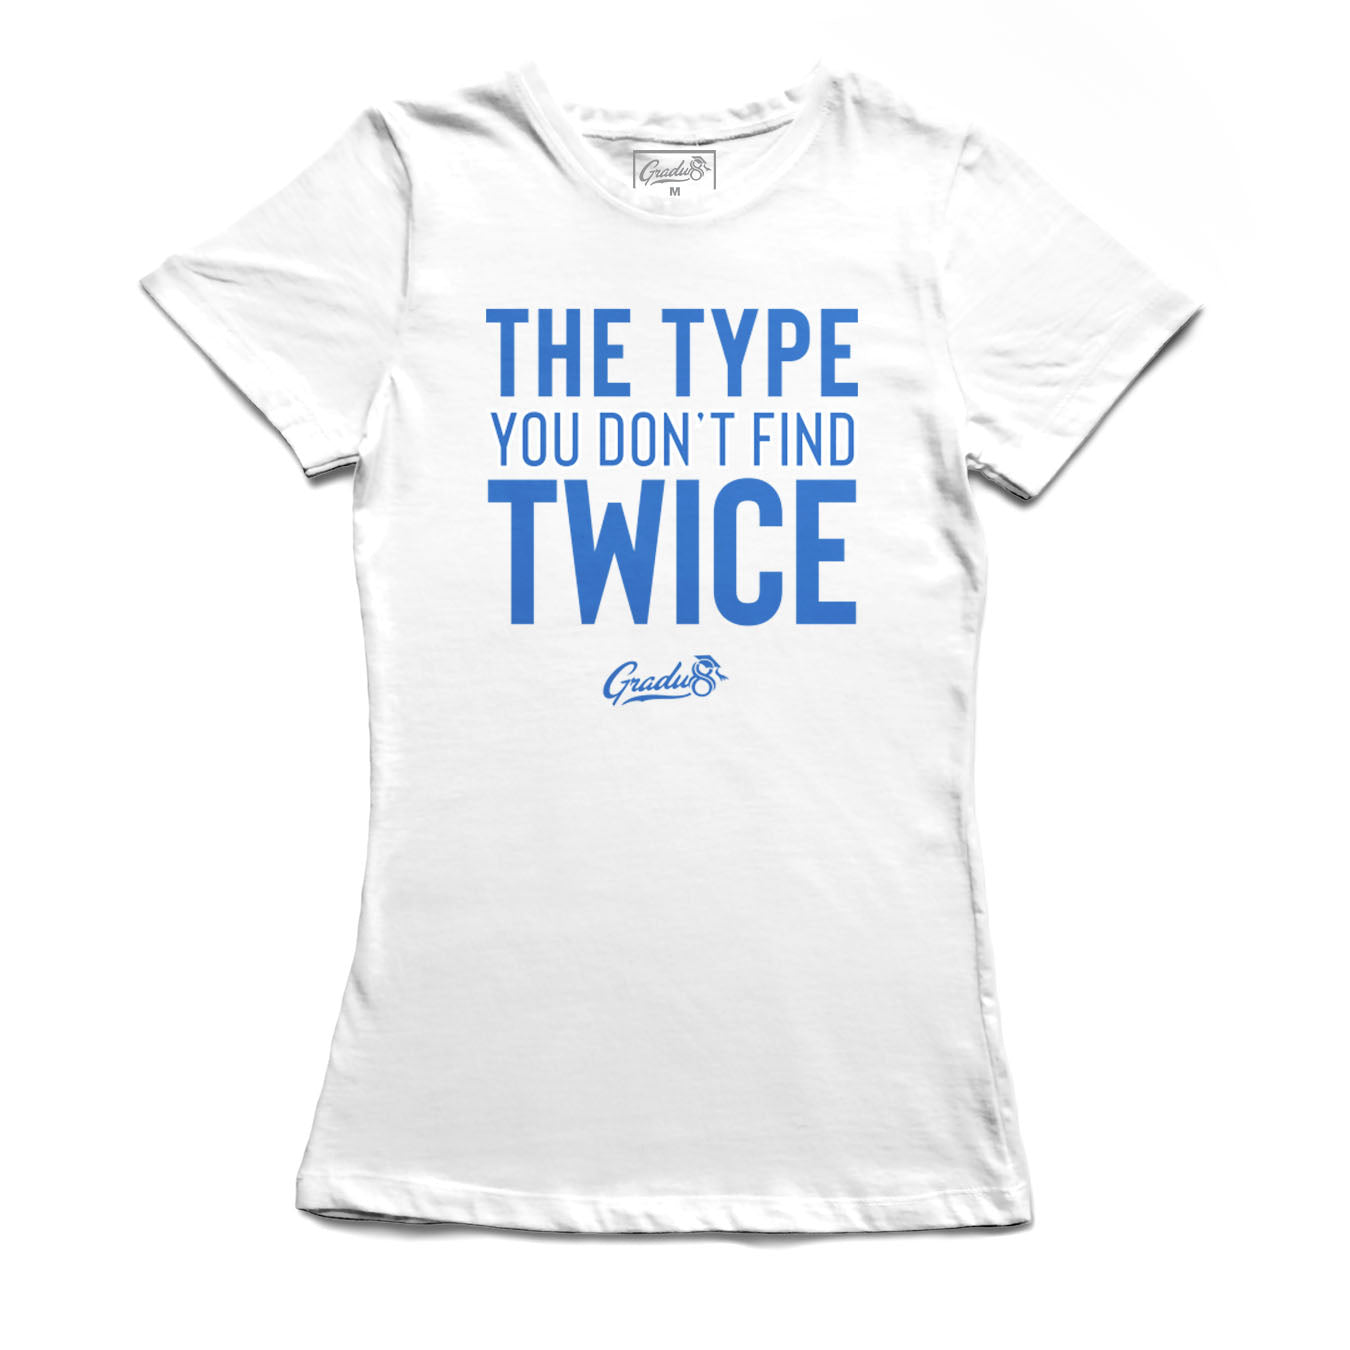 Women's "Type You Don't Find Twice" Premium T-Shirt - White